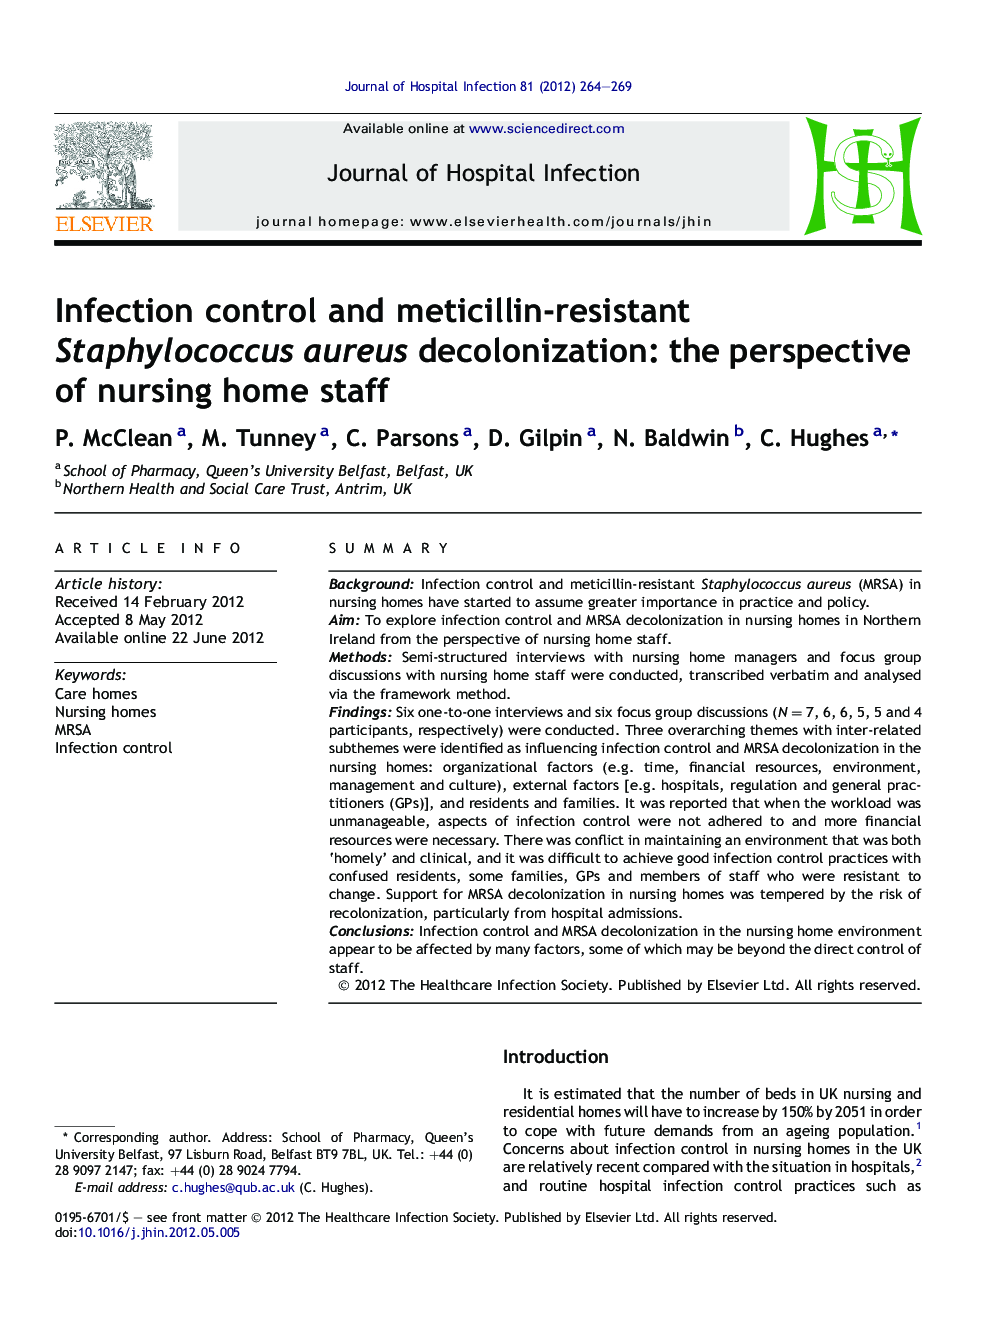 Infection control and meticillin-resistant Staphylococcus aureus decolonization: the perspective of nursing home staff